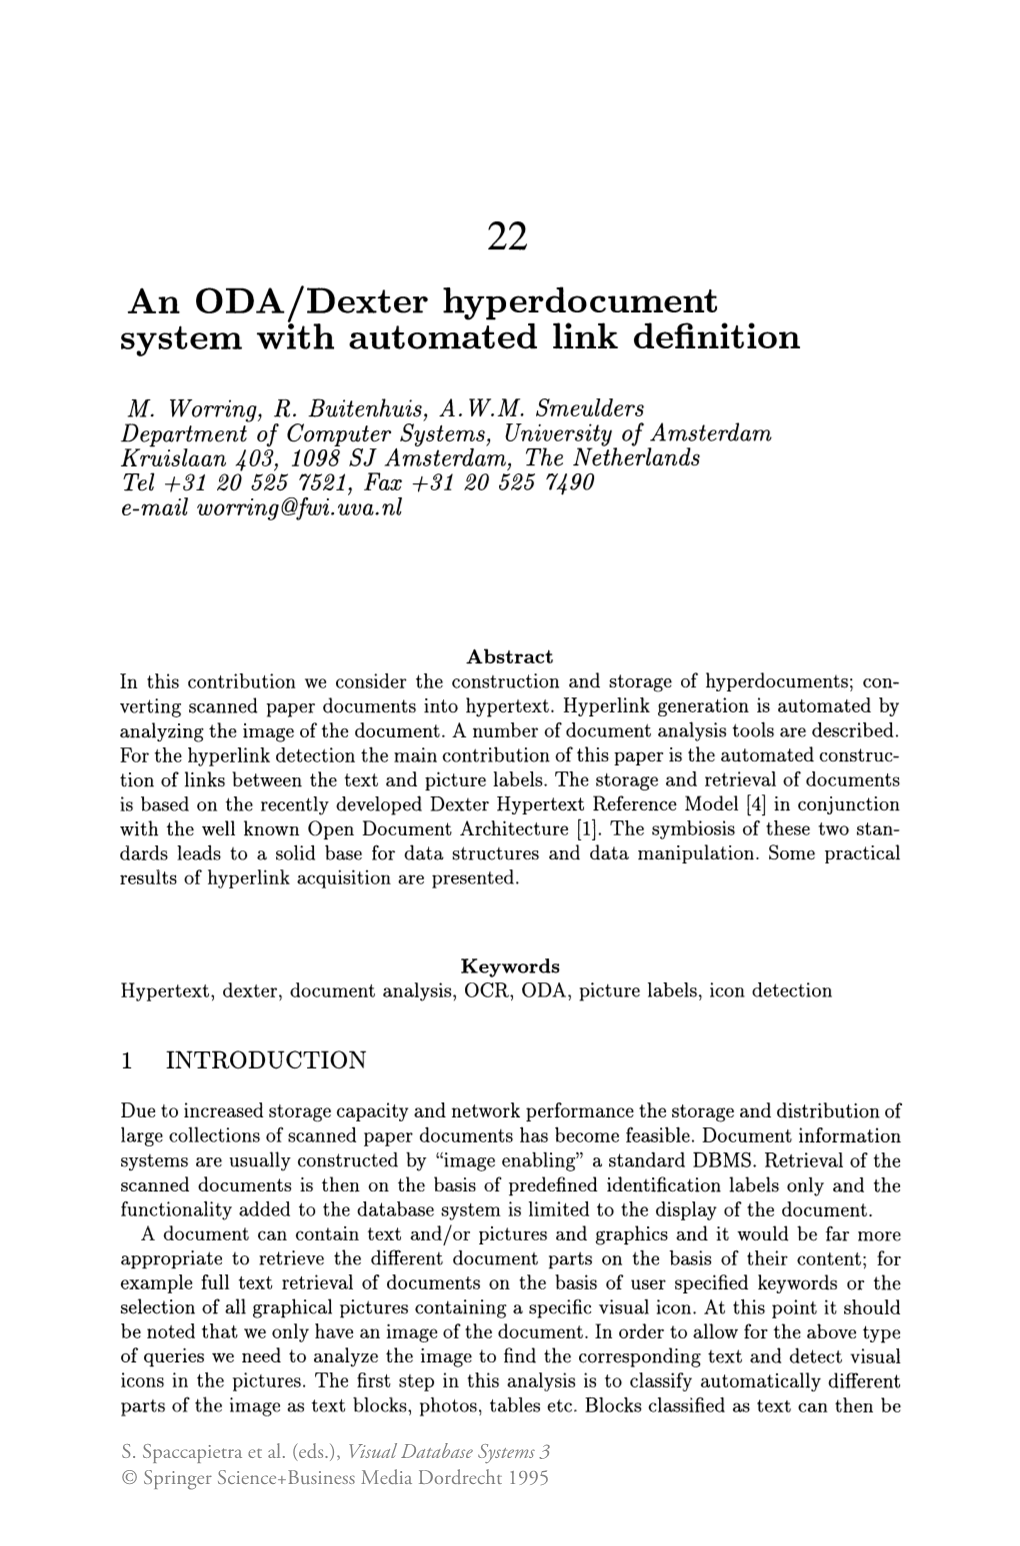 An ODA/Dexter Hyperdocument System with Automated Link Definition